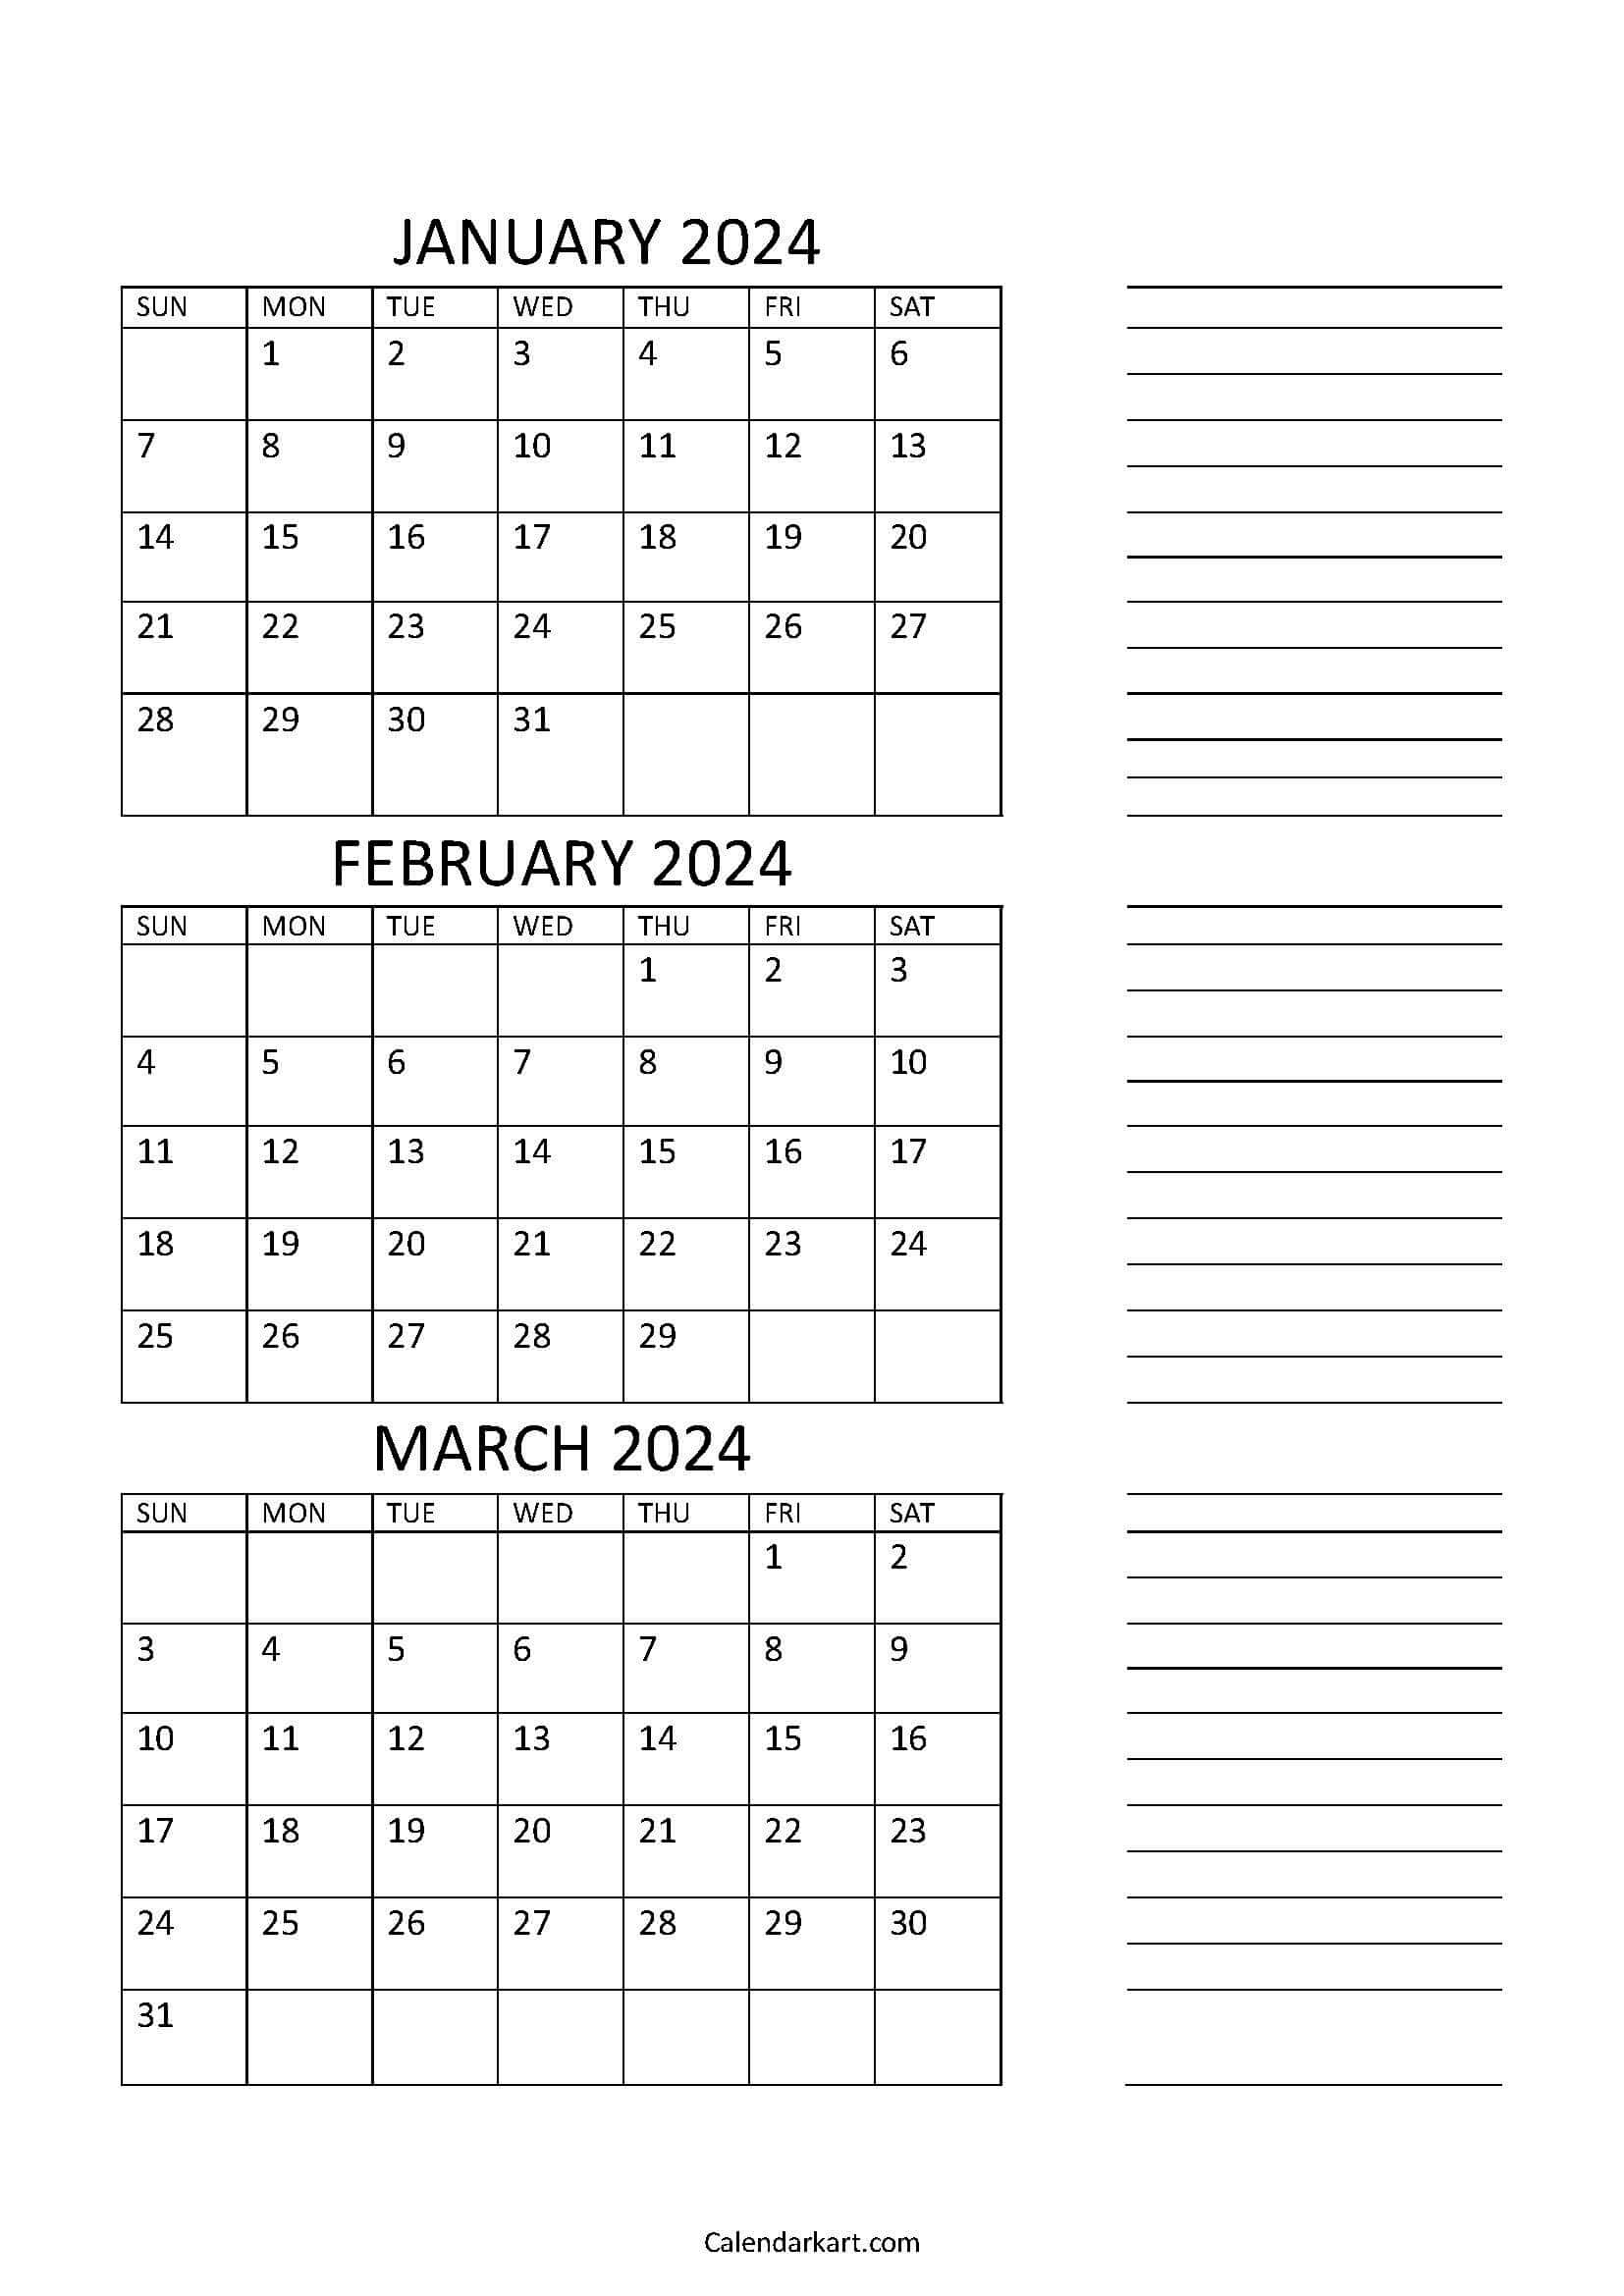 Free Printable January To March 2024 Calendar - Calendarkart within Free Printable Calendar 2024 3 Months